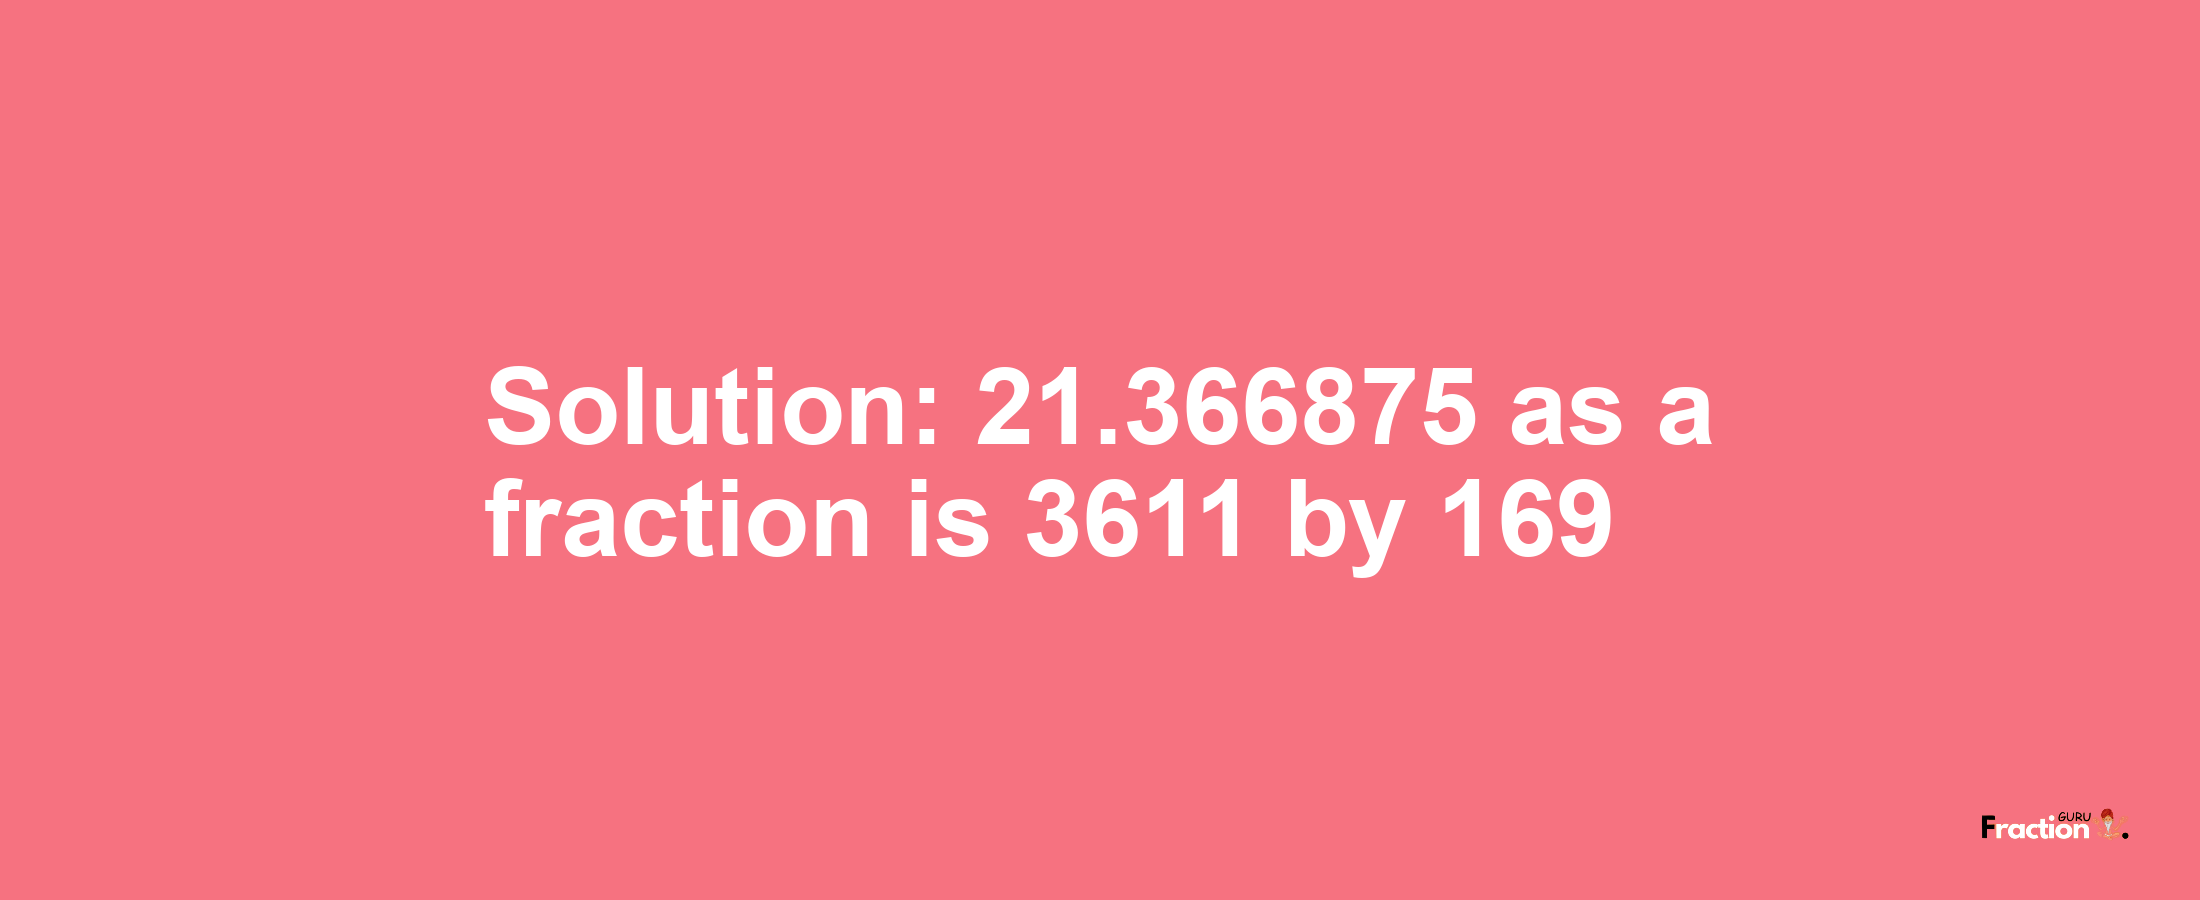 Solution:21.366875 as a fraction is 3611/169